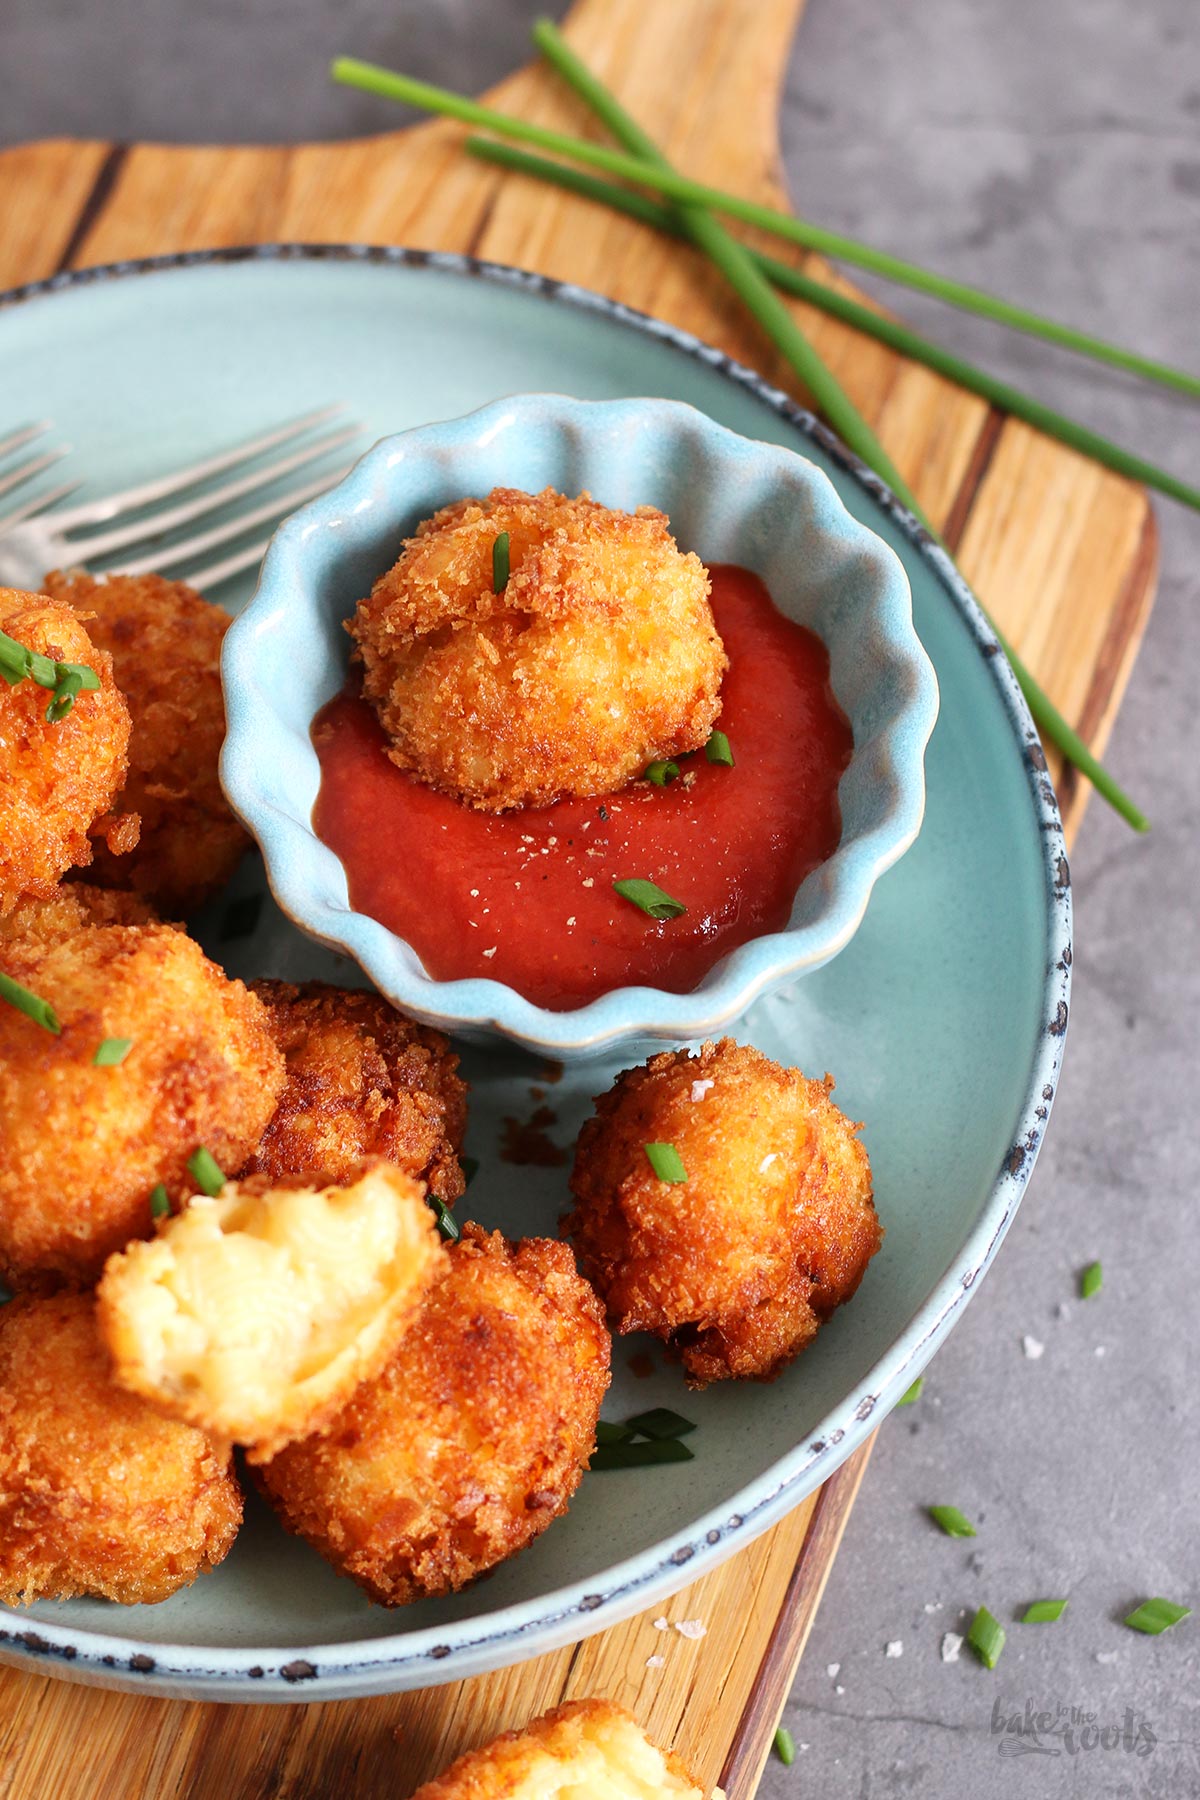 Fried Mac 'n' Cheese Balls | Bake to the roots